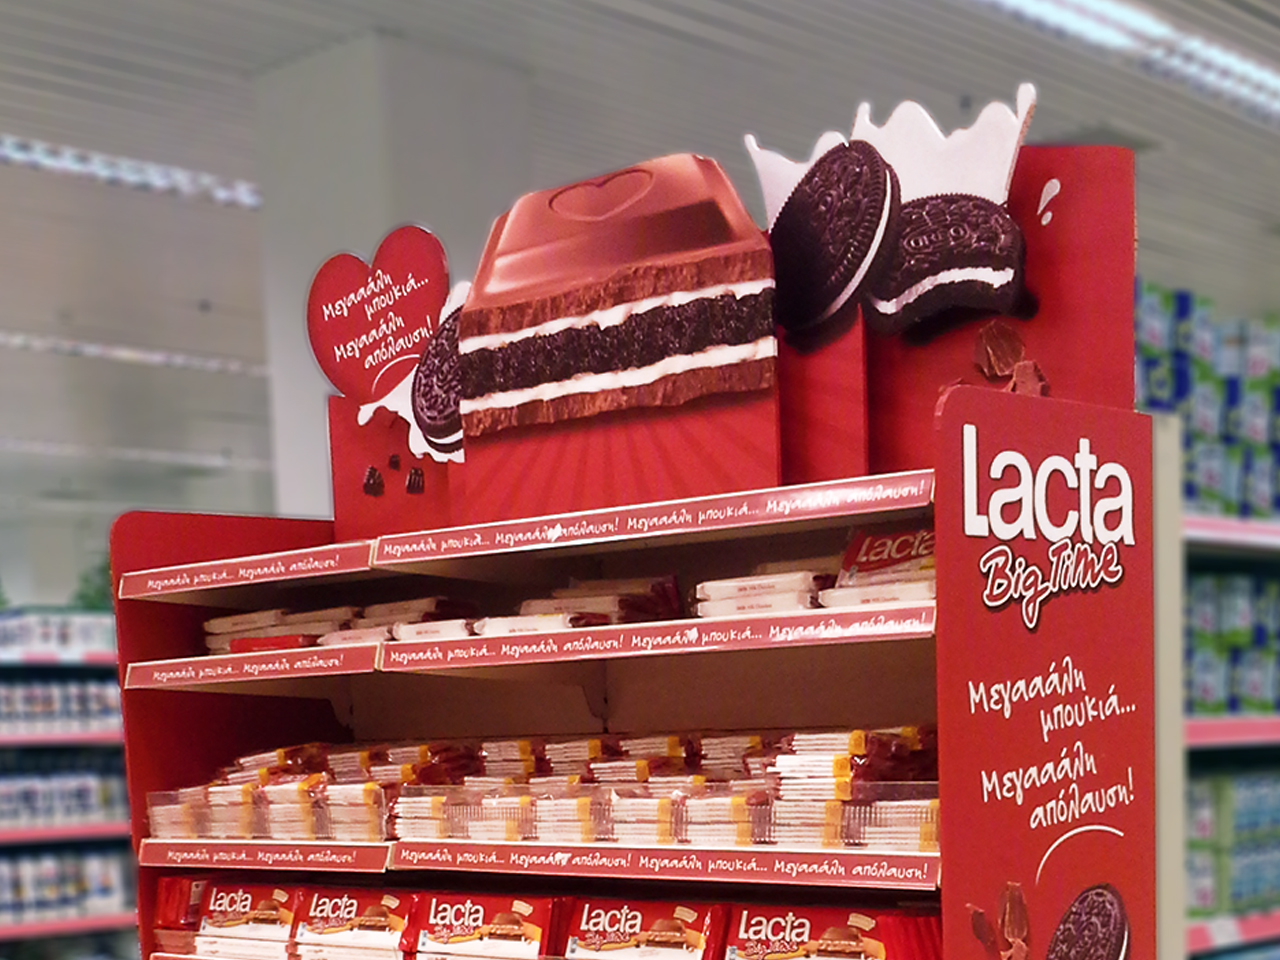 mondelez, lacta, big time, stand, in-store promotion